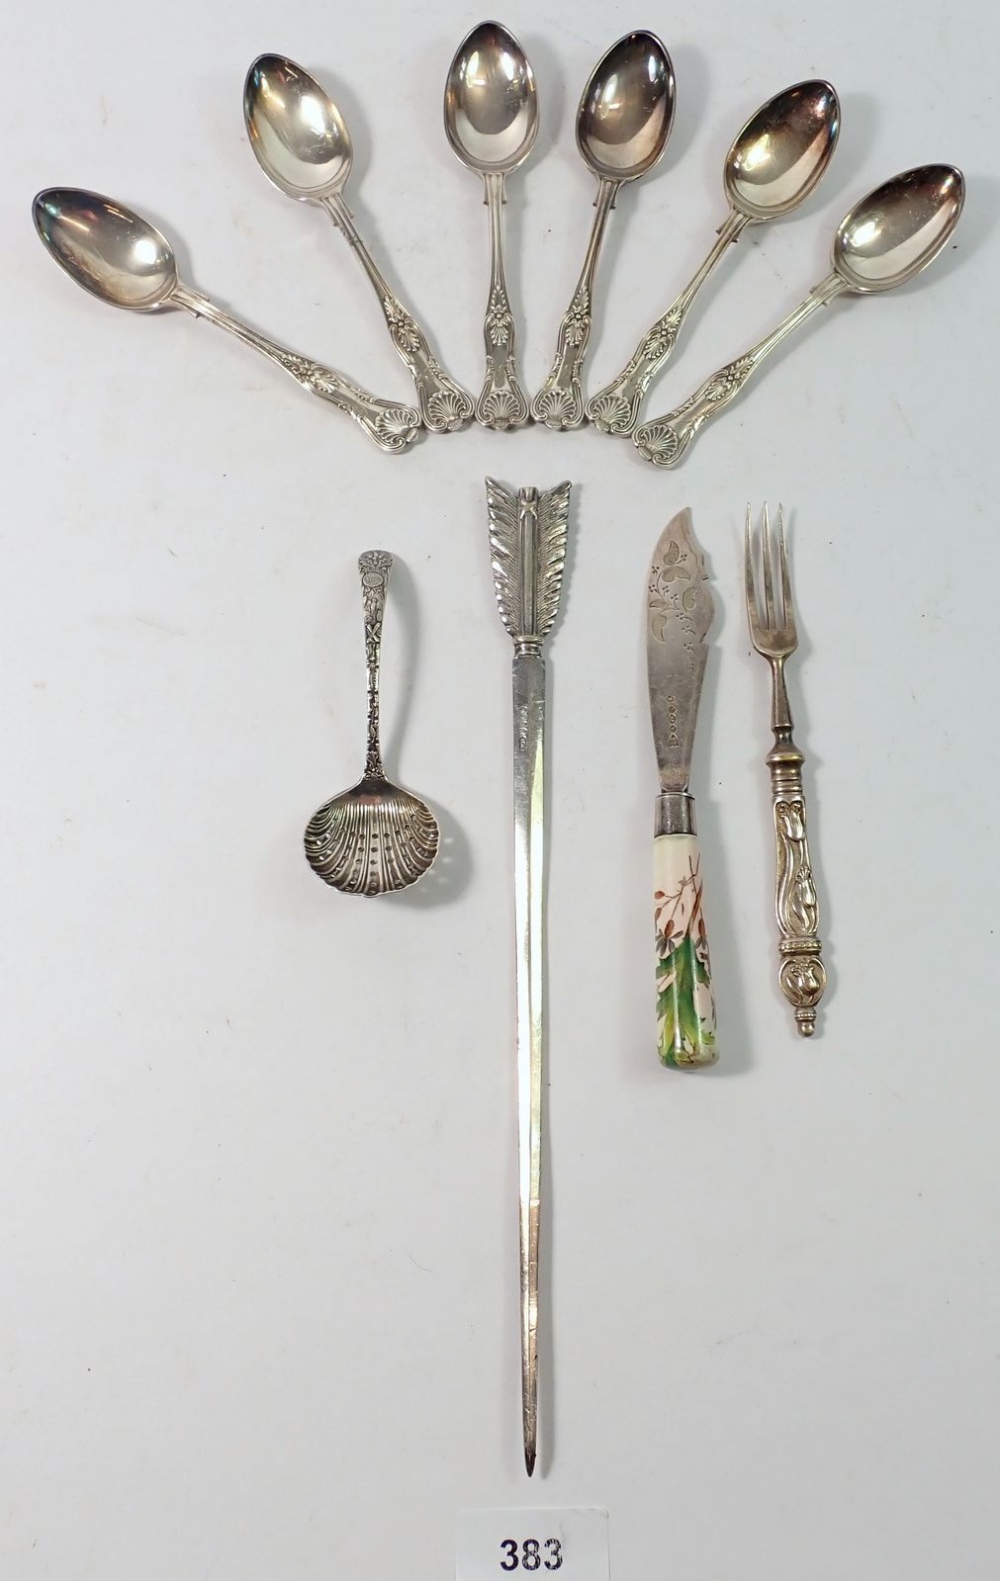 A silver plated arrow form paperknife and various silver plated cutlery